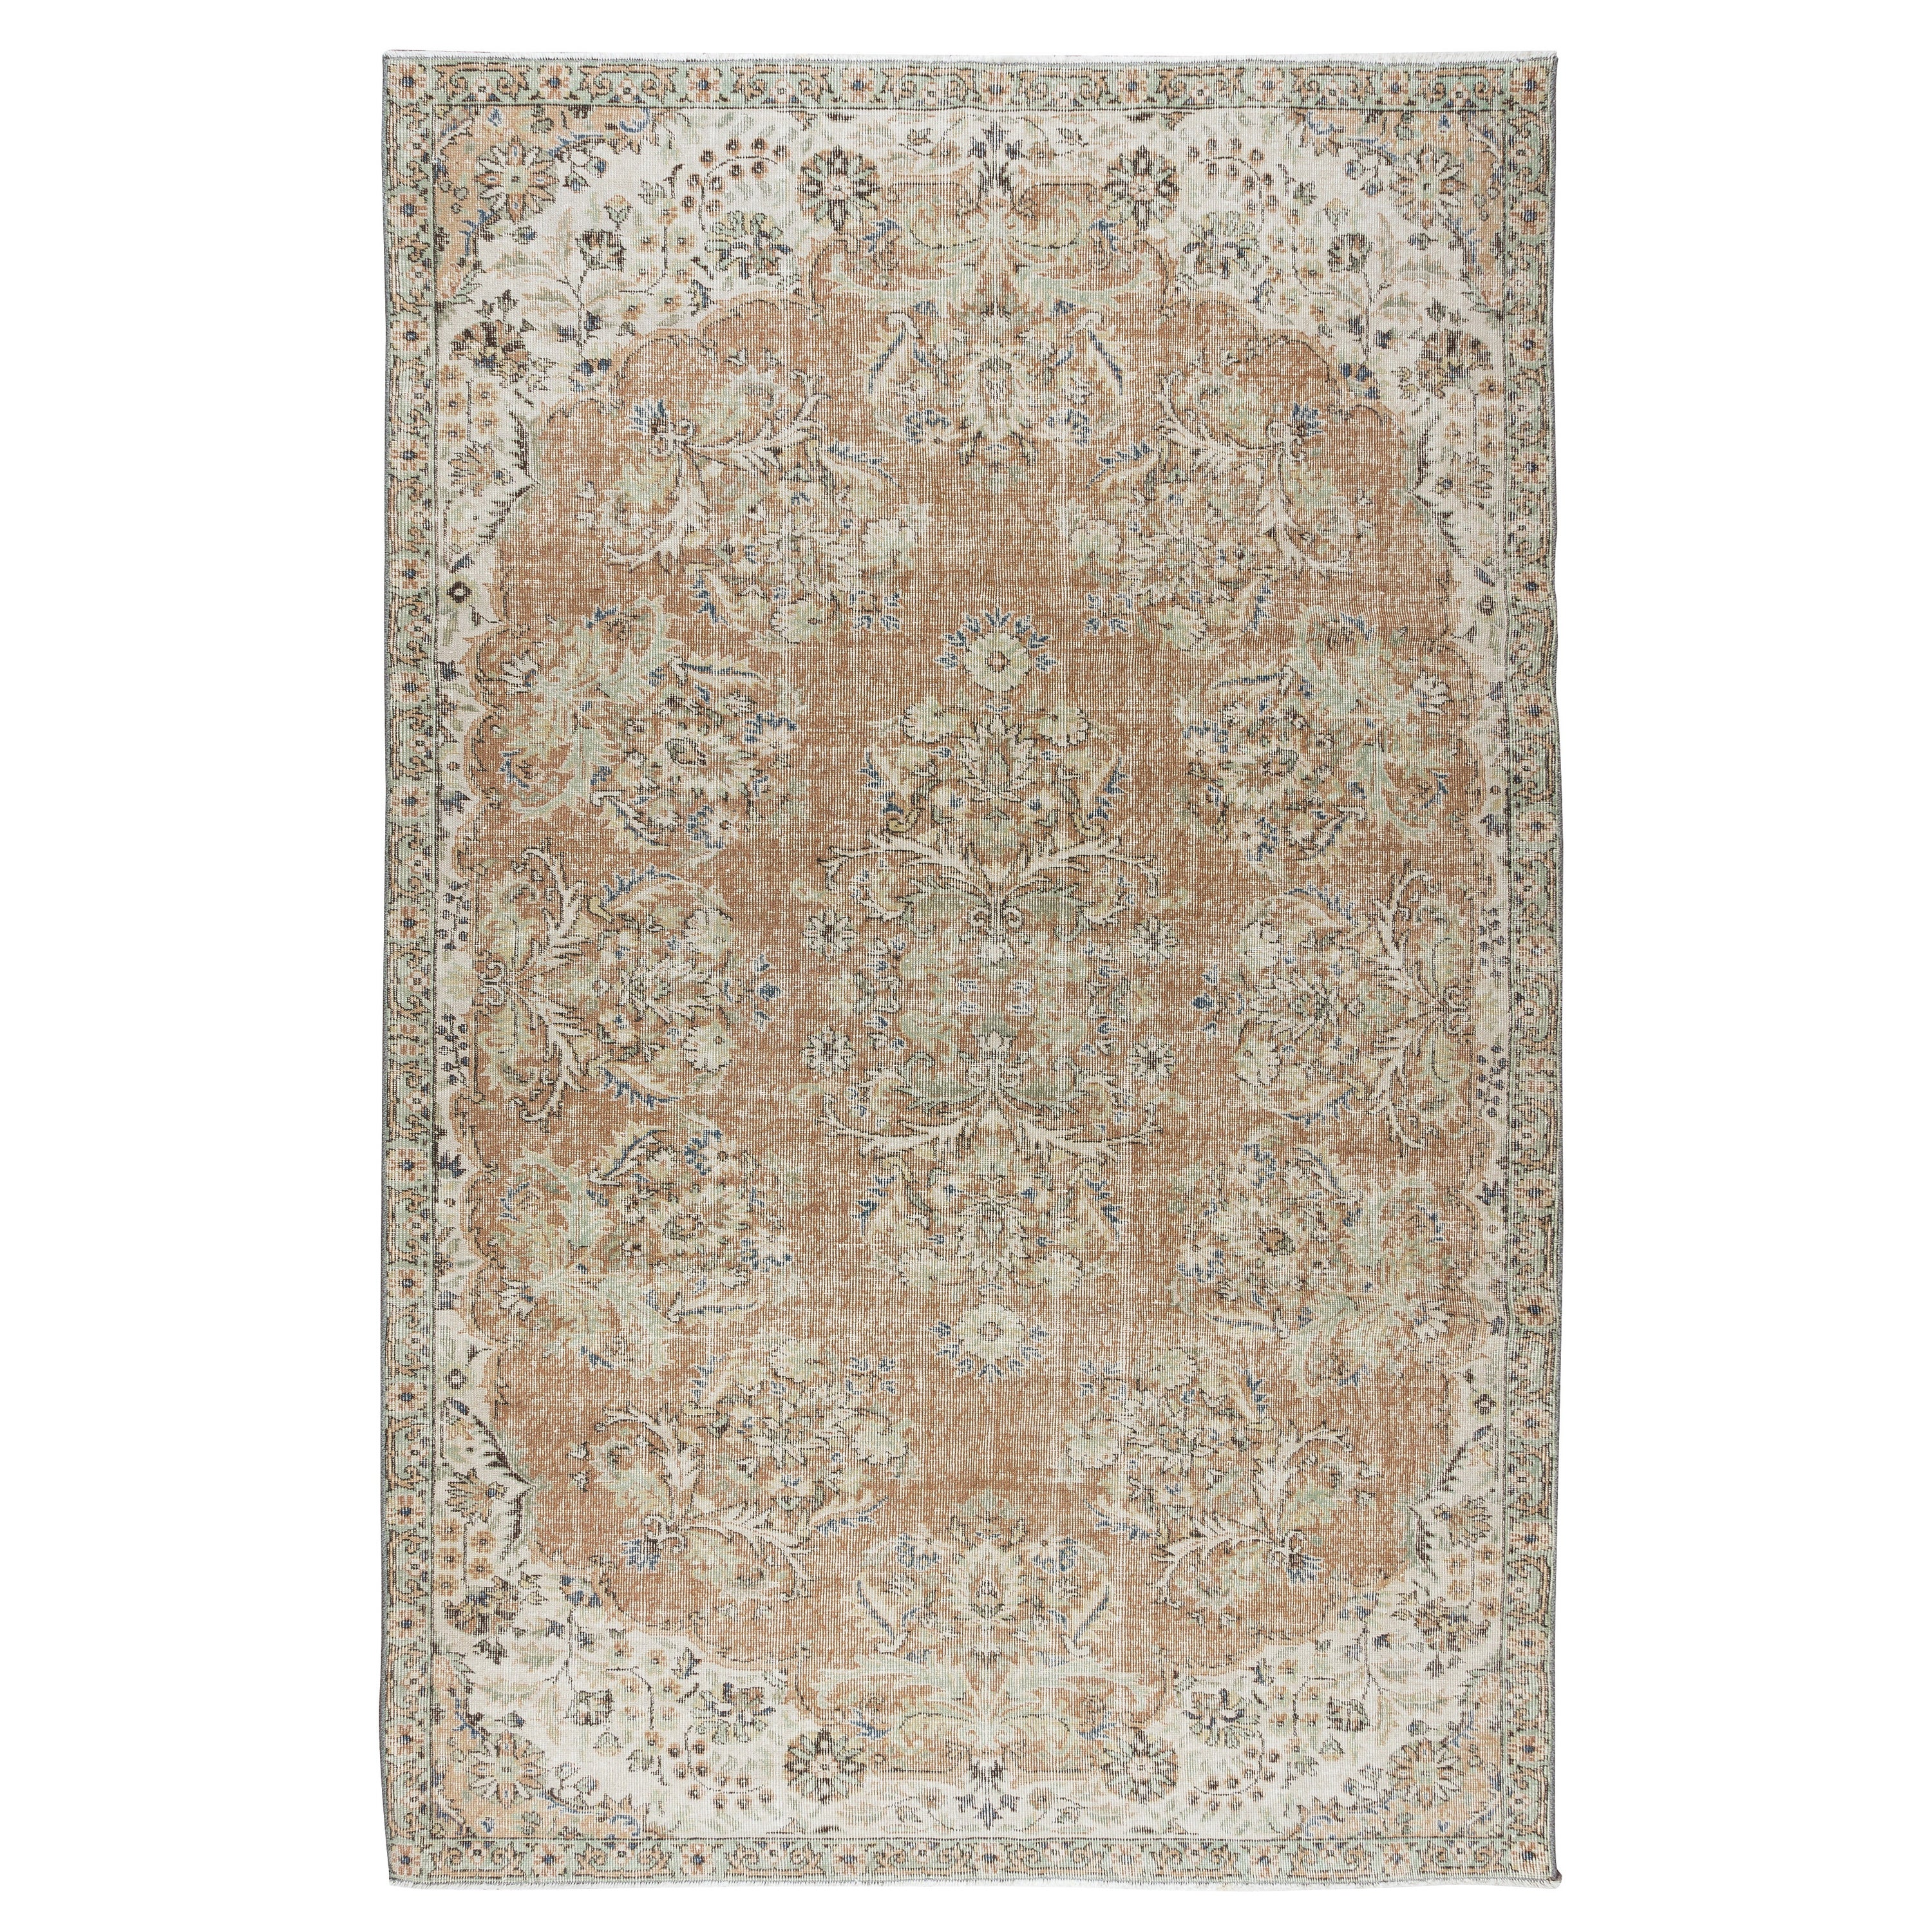 6.5x10.2 Ft Hand Knotted Vintage Oushak Rug,  Turkish Carpet with Soft Colors